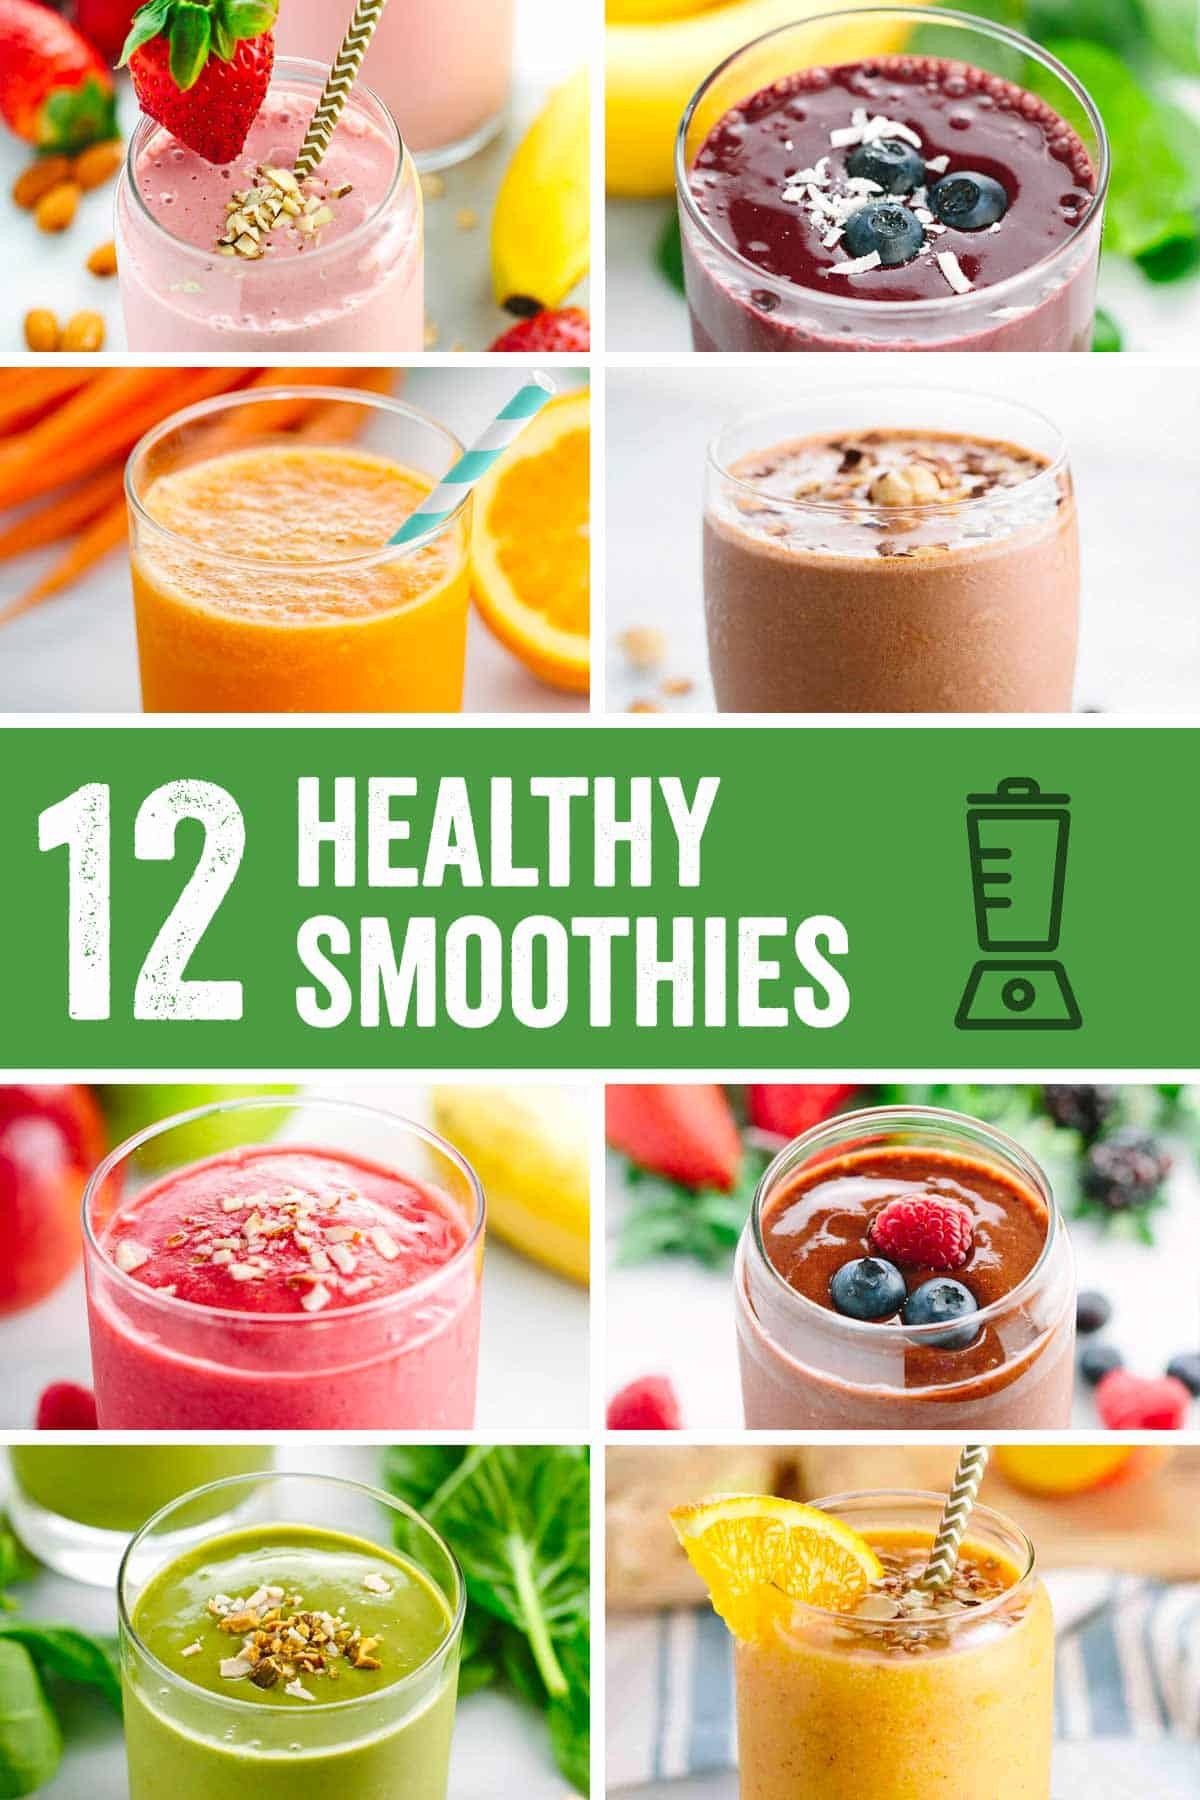 Healthy Smoothies Recipes
 Roundup Easy Five Minute Healthy Smoothie Recipes